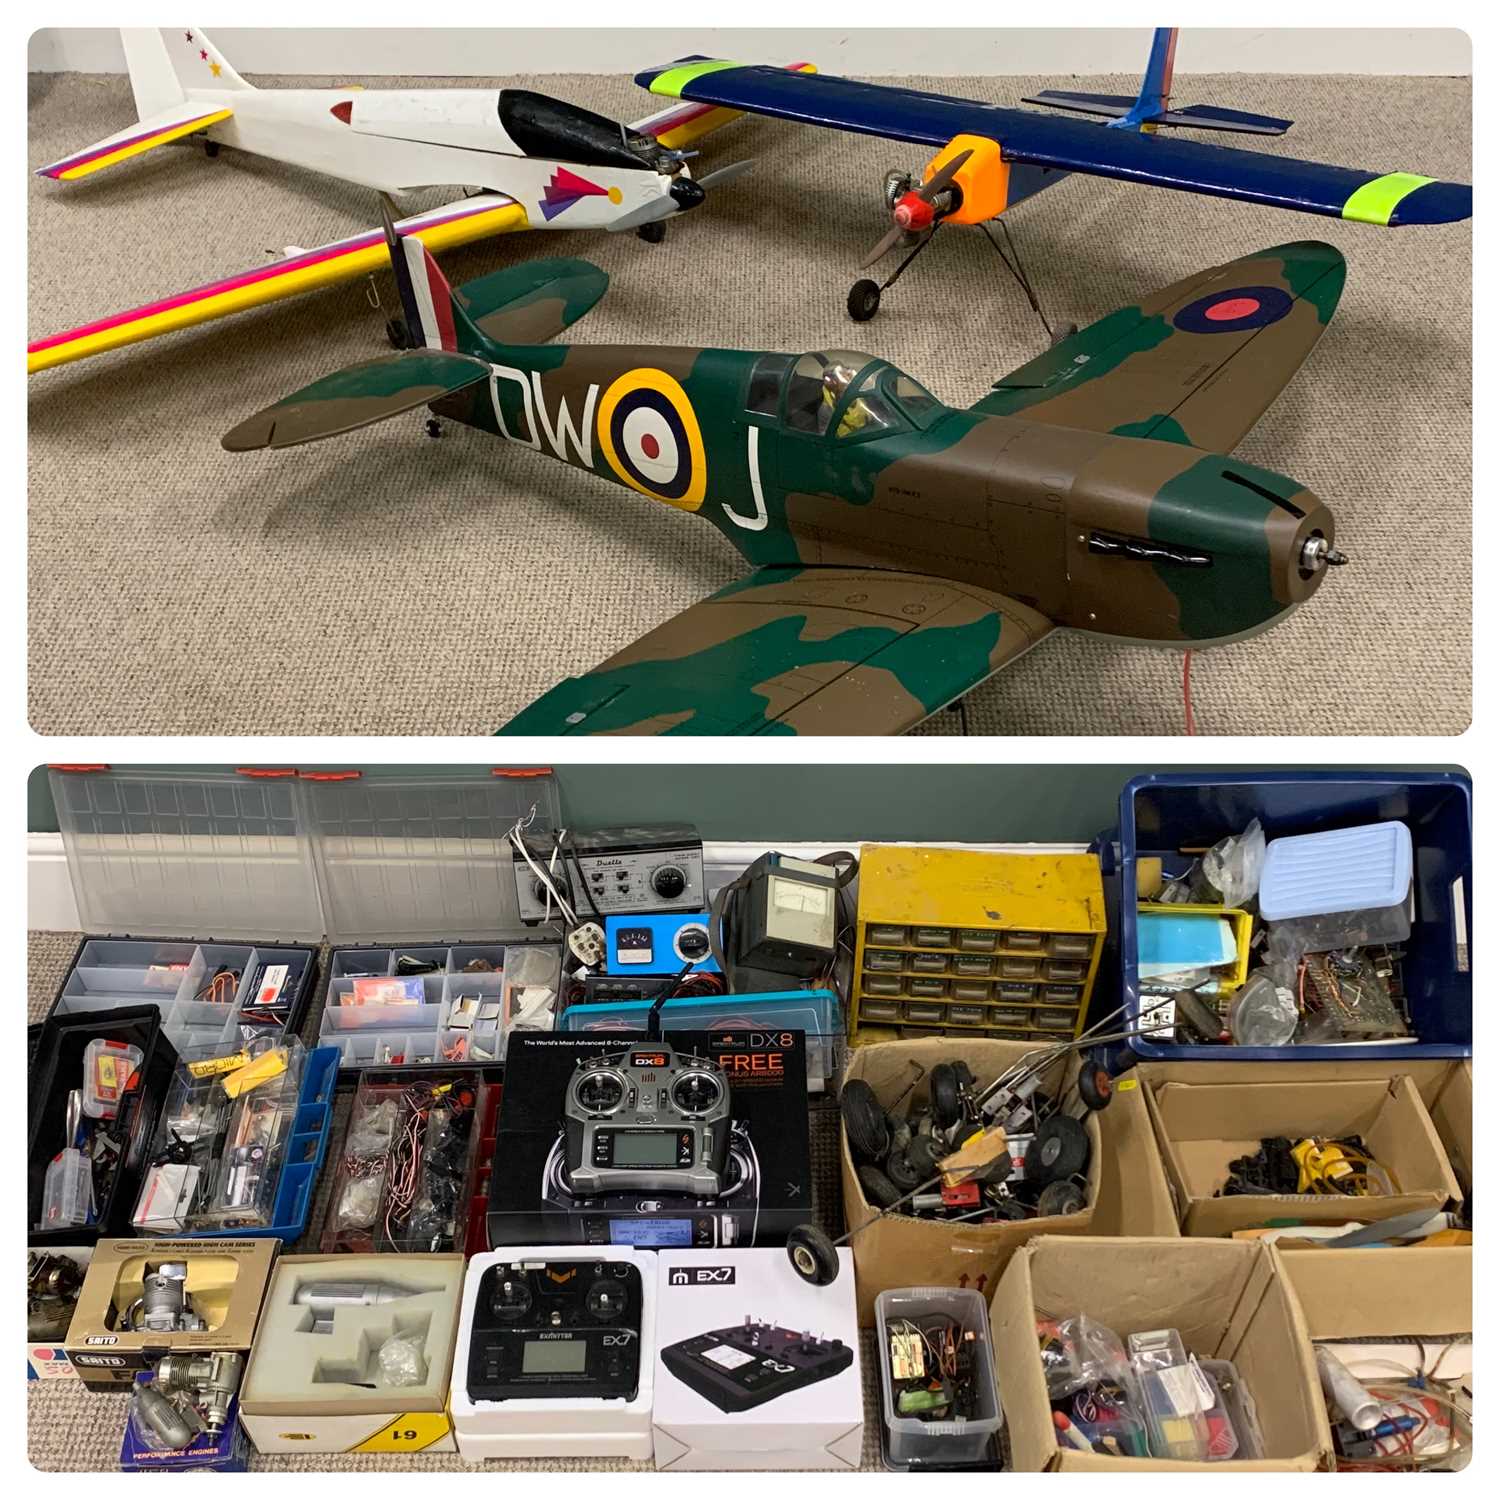 THREE RADIO CONTROLLED MODEL AIRPLANES & A QUANTITY OF POSSIBLY RELATED GOODS AND MATERIALS,